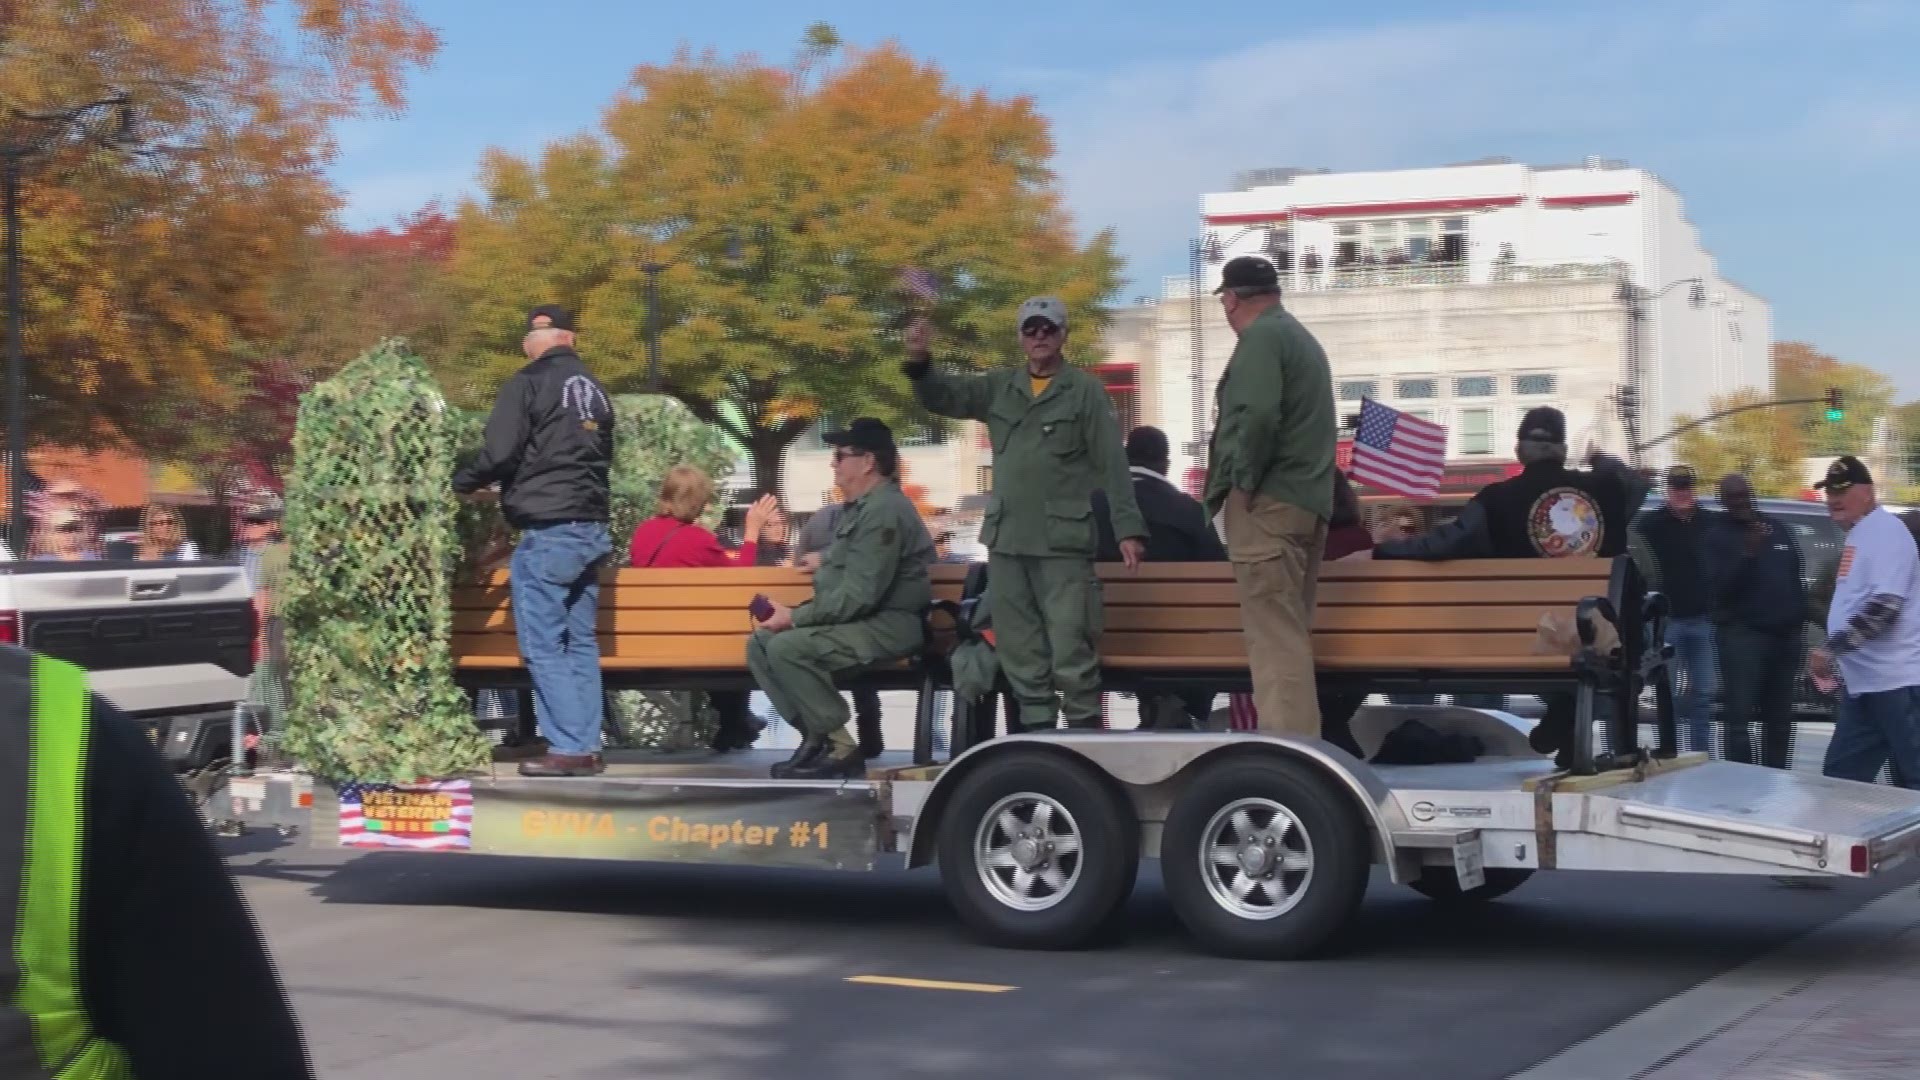 Downtown Marietta was full of people on Monday for the annual Veterans Day parade and ceremony.